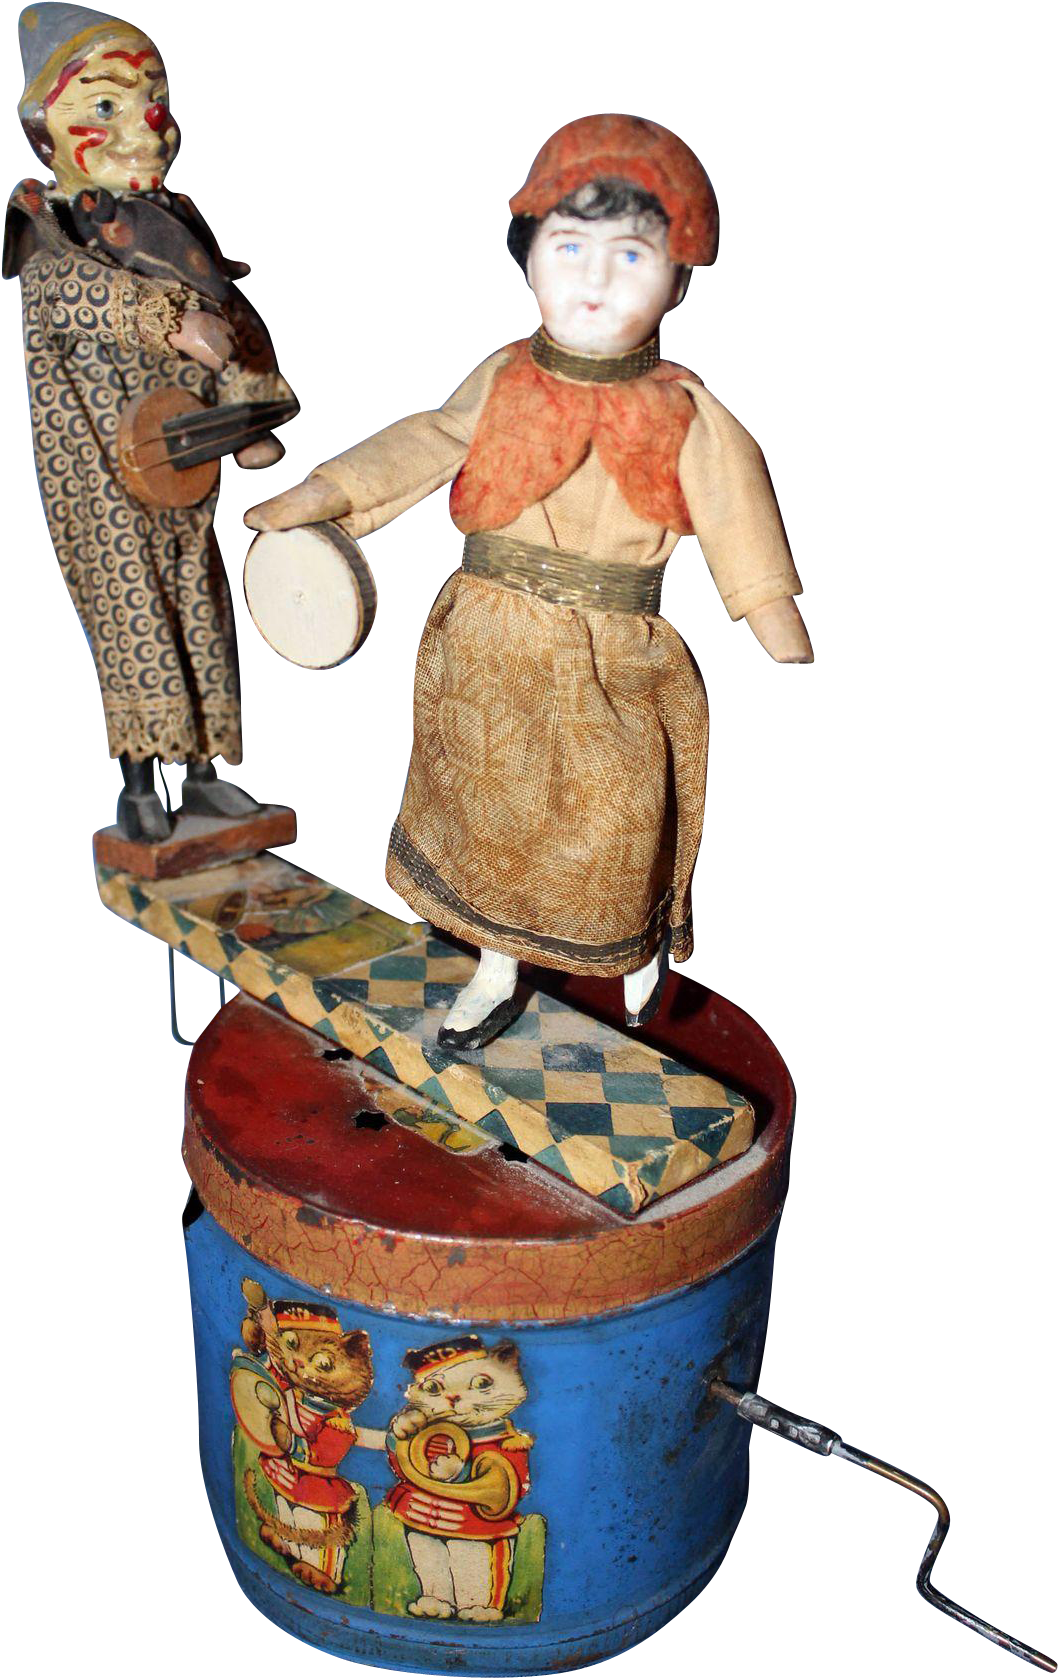 Dancing Doll And Musical Clown - Figurine (1677x1677)